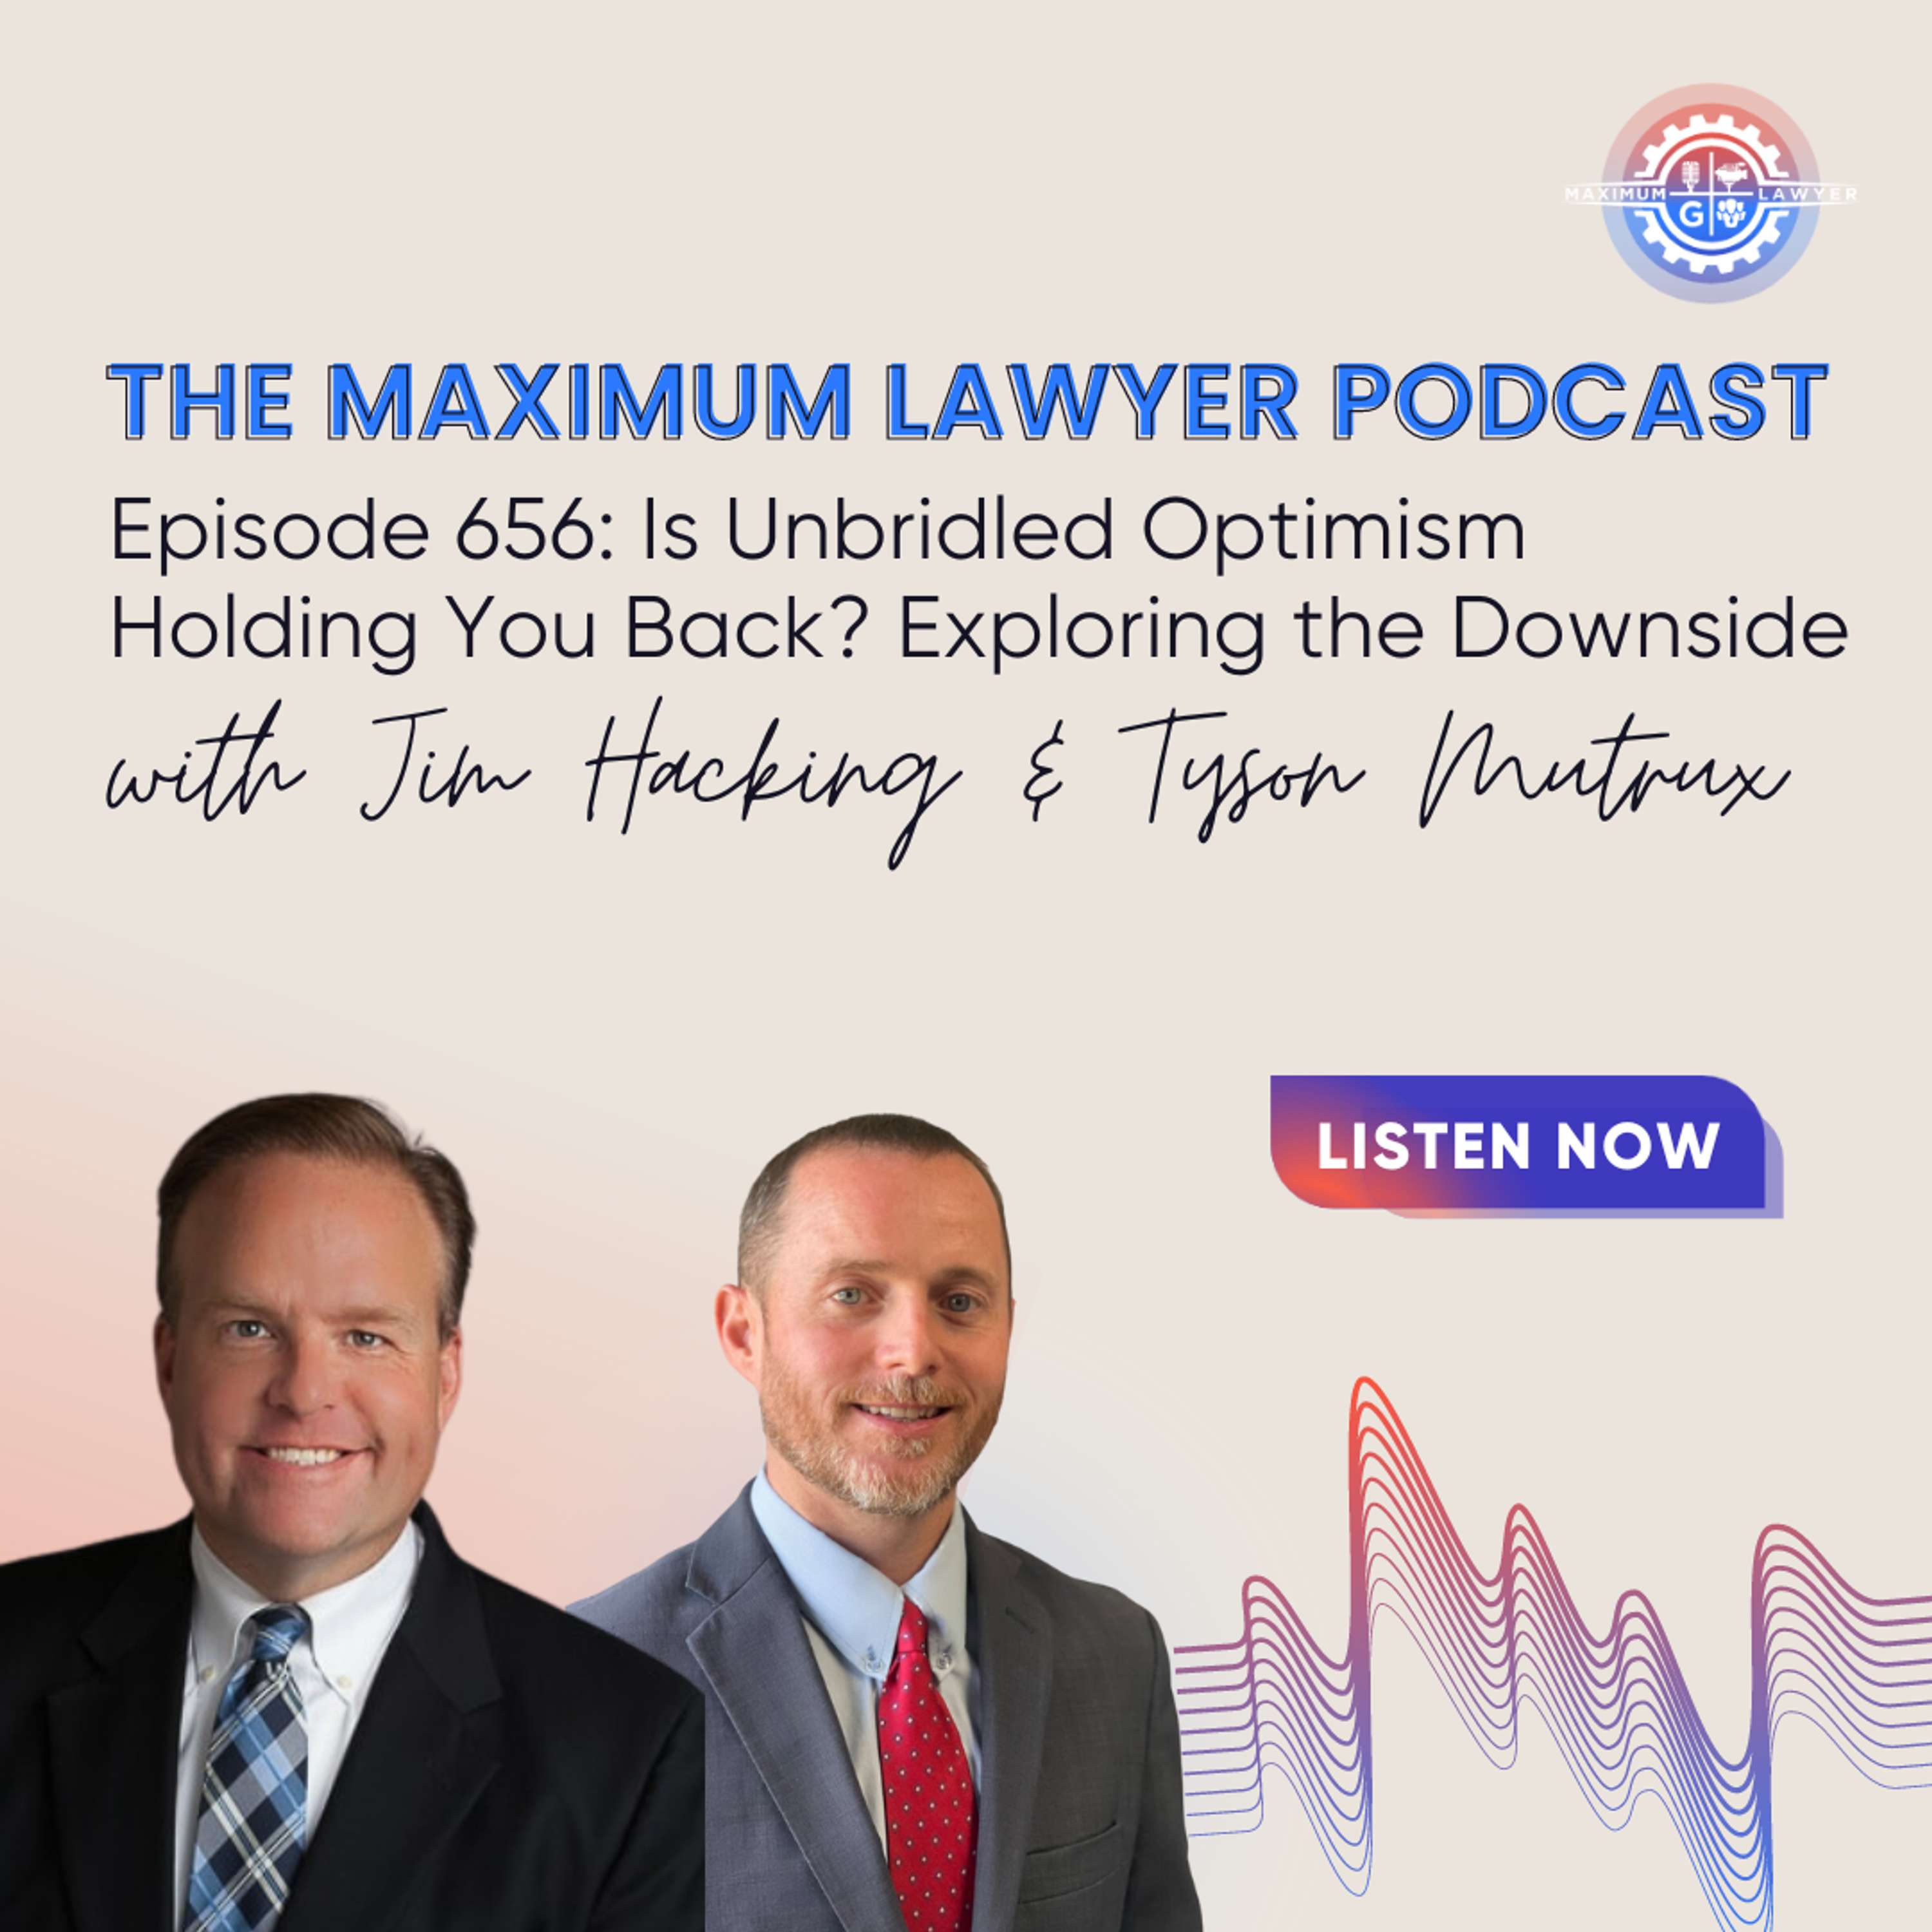 Is Unbridled Optimism Holding You Back? Exploring the Downside with Jim Hacking and Tyson Mutrux